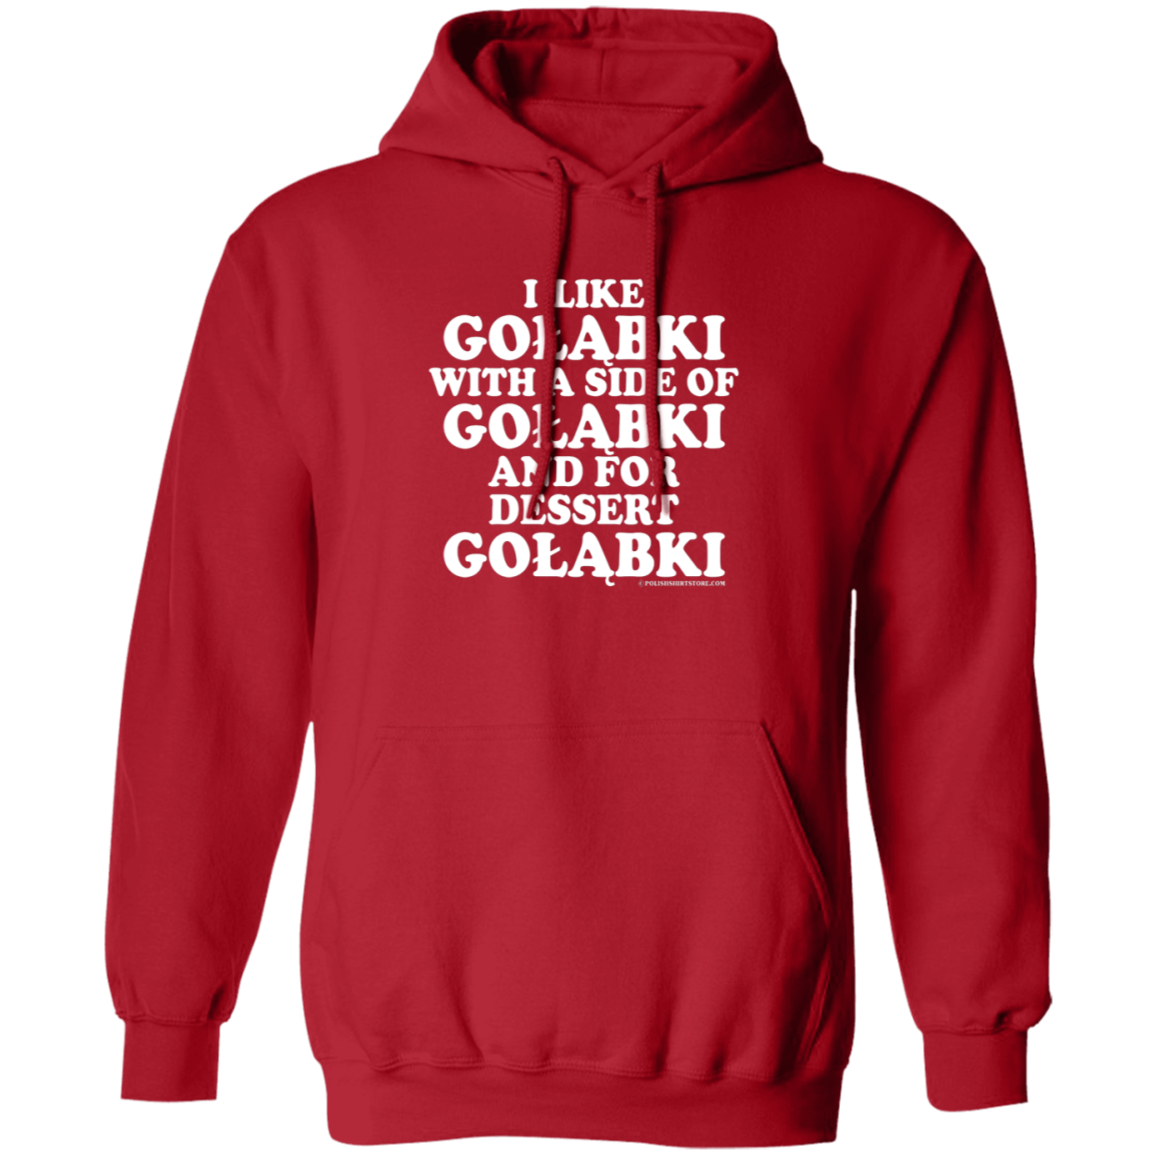 Golabki With A Side Of Golabki Apparel CustomCat G185 Pullover Hoodie Red S